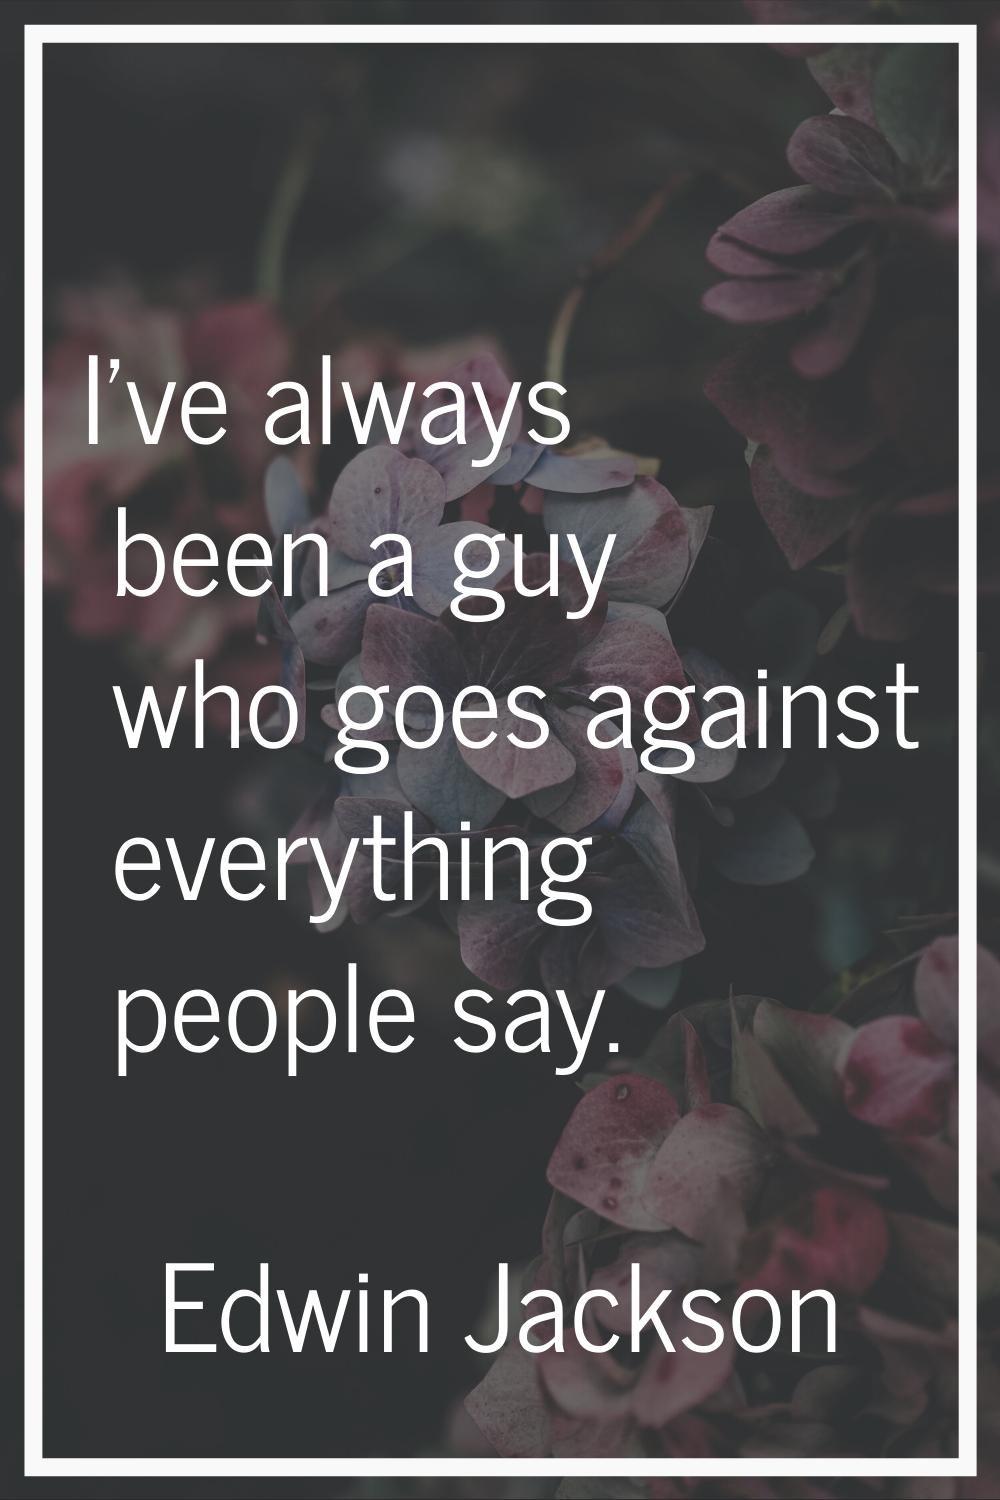 I've always been a guy who goes against everything people say.